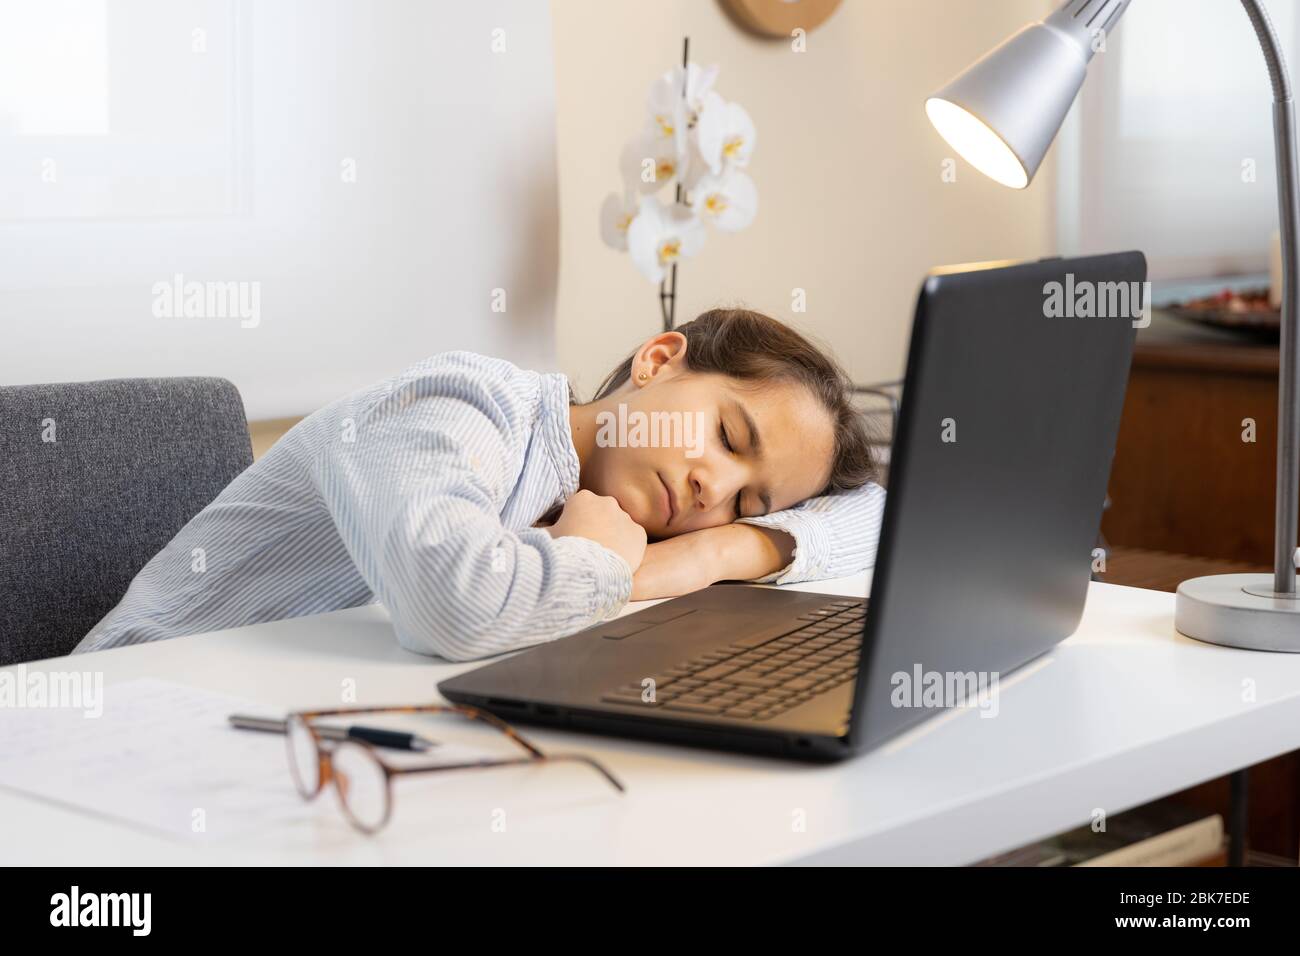 Exhausted girl asleep next to the computer Stock Photo